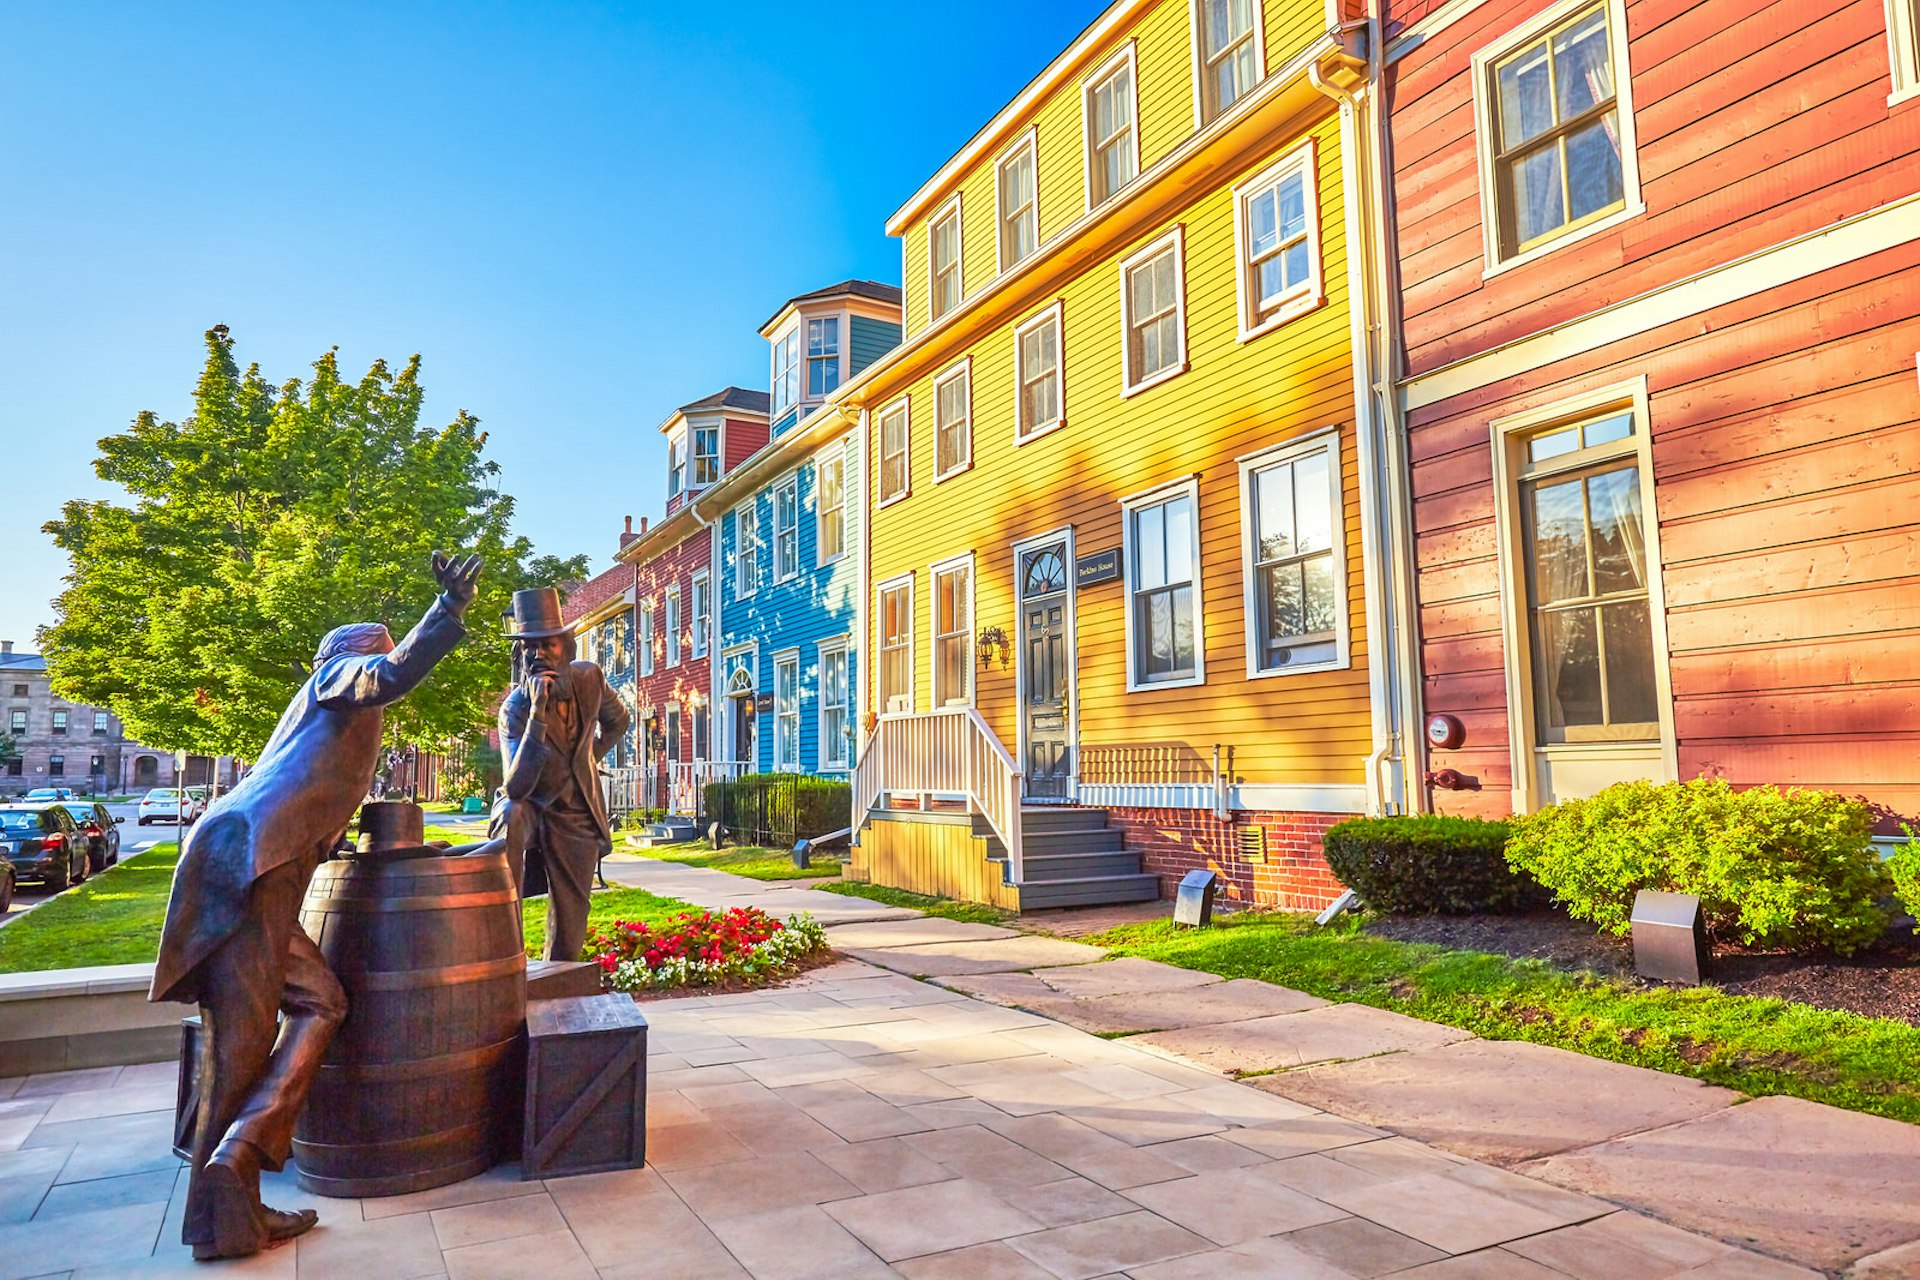 Celebrated as the Fathers of Confederation, John Hamilton Gray and John Hamilton Gray (no relation) are represented in bronze statue in Charlottetown © Peter Unger / Lonely Planet Images